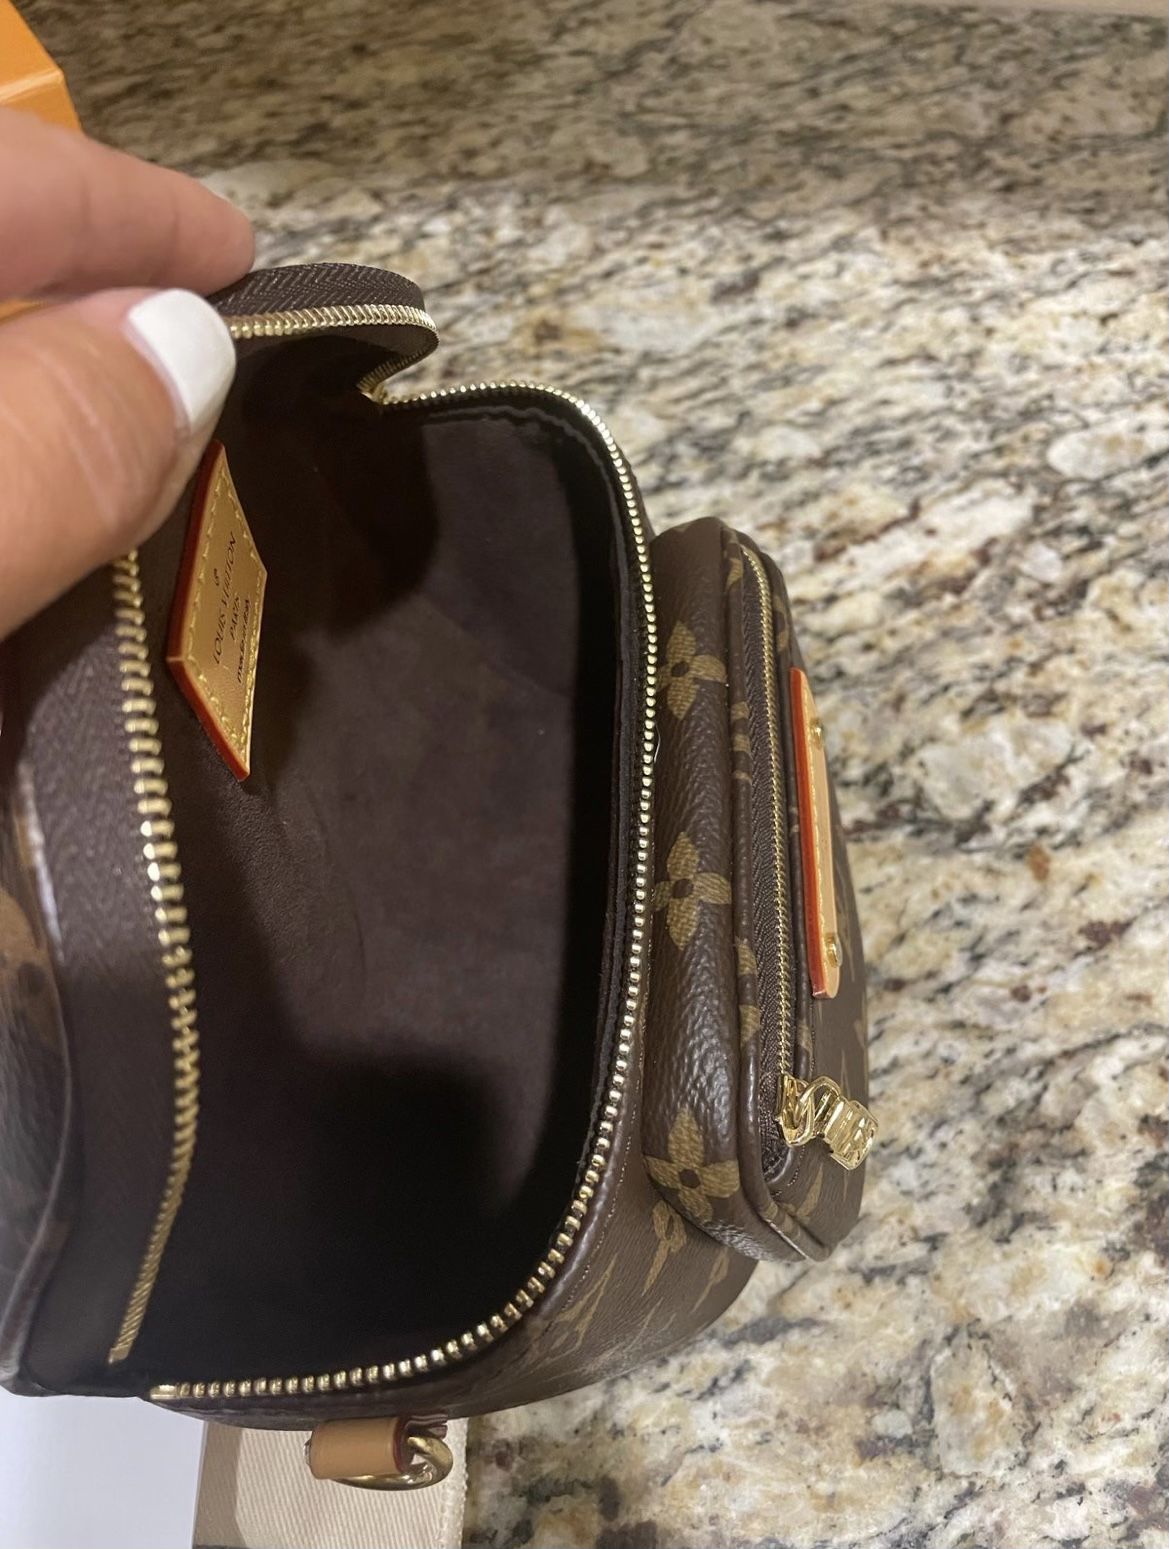 Louis Vuitton Giant Monogram Bumbag for Sale in New York, NY - OfferUp